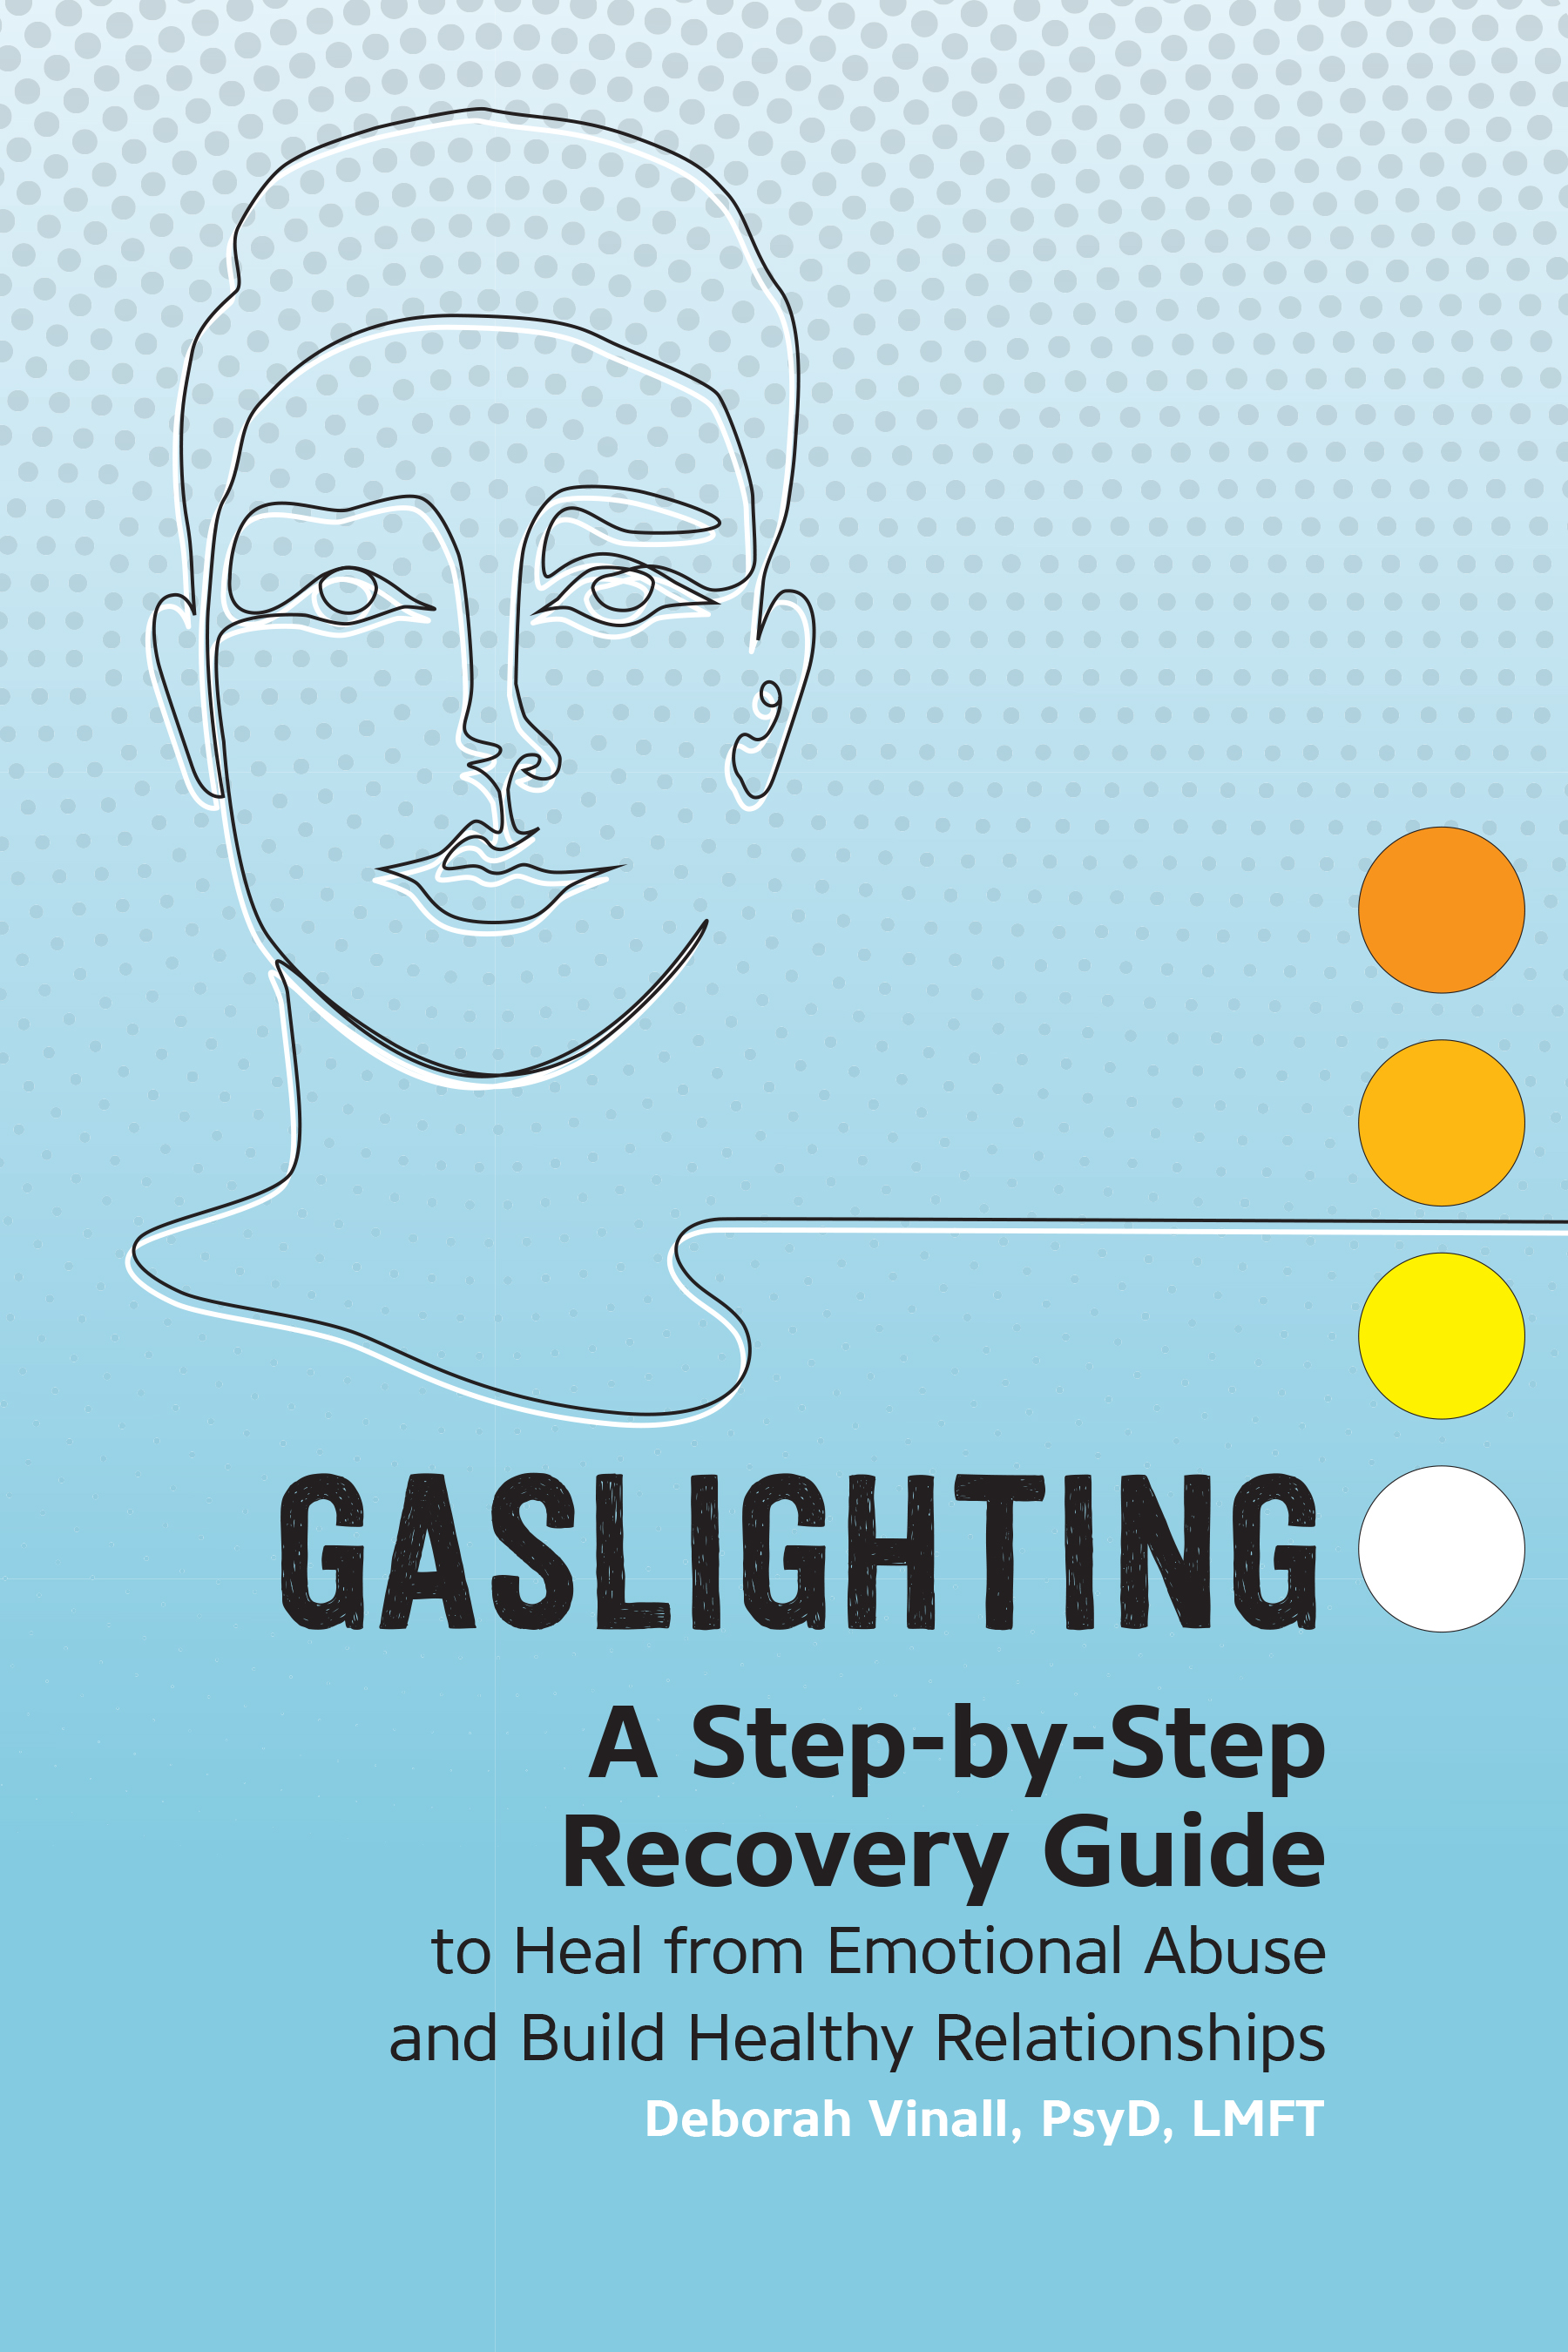 Gaslighting: A Step-by-Step Guide to Heal from Emotional Abuse